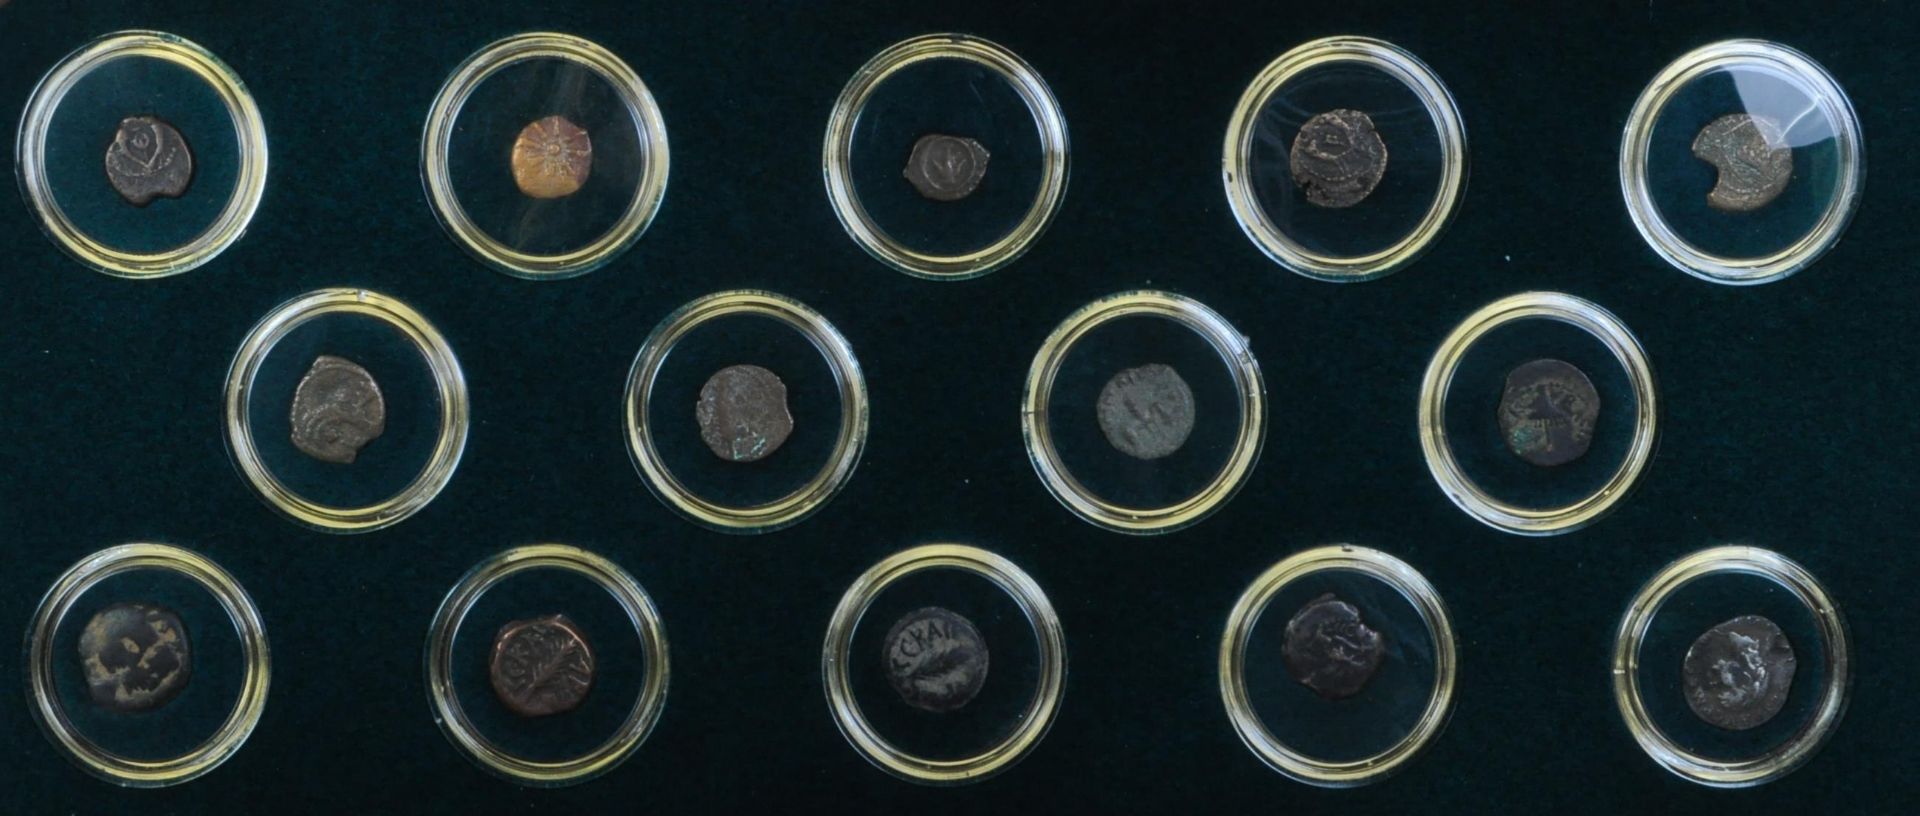 'THE BIBLICAL HOLY LAND: JUDAEA' 14 COIN COLLECTION - Image 2 of 2